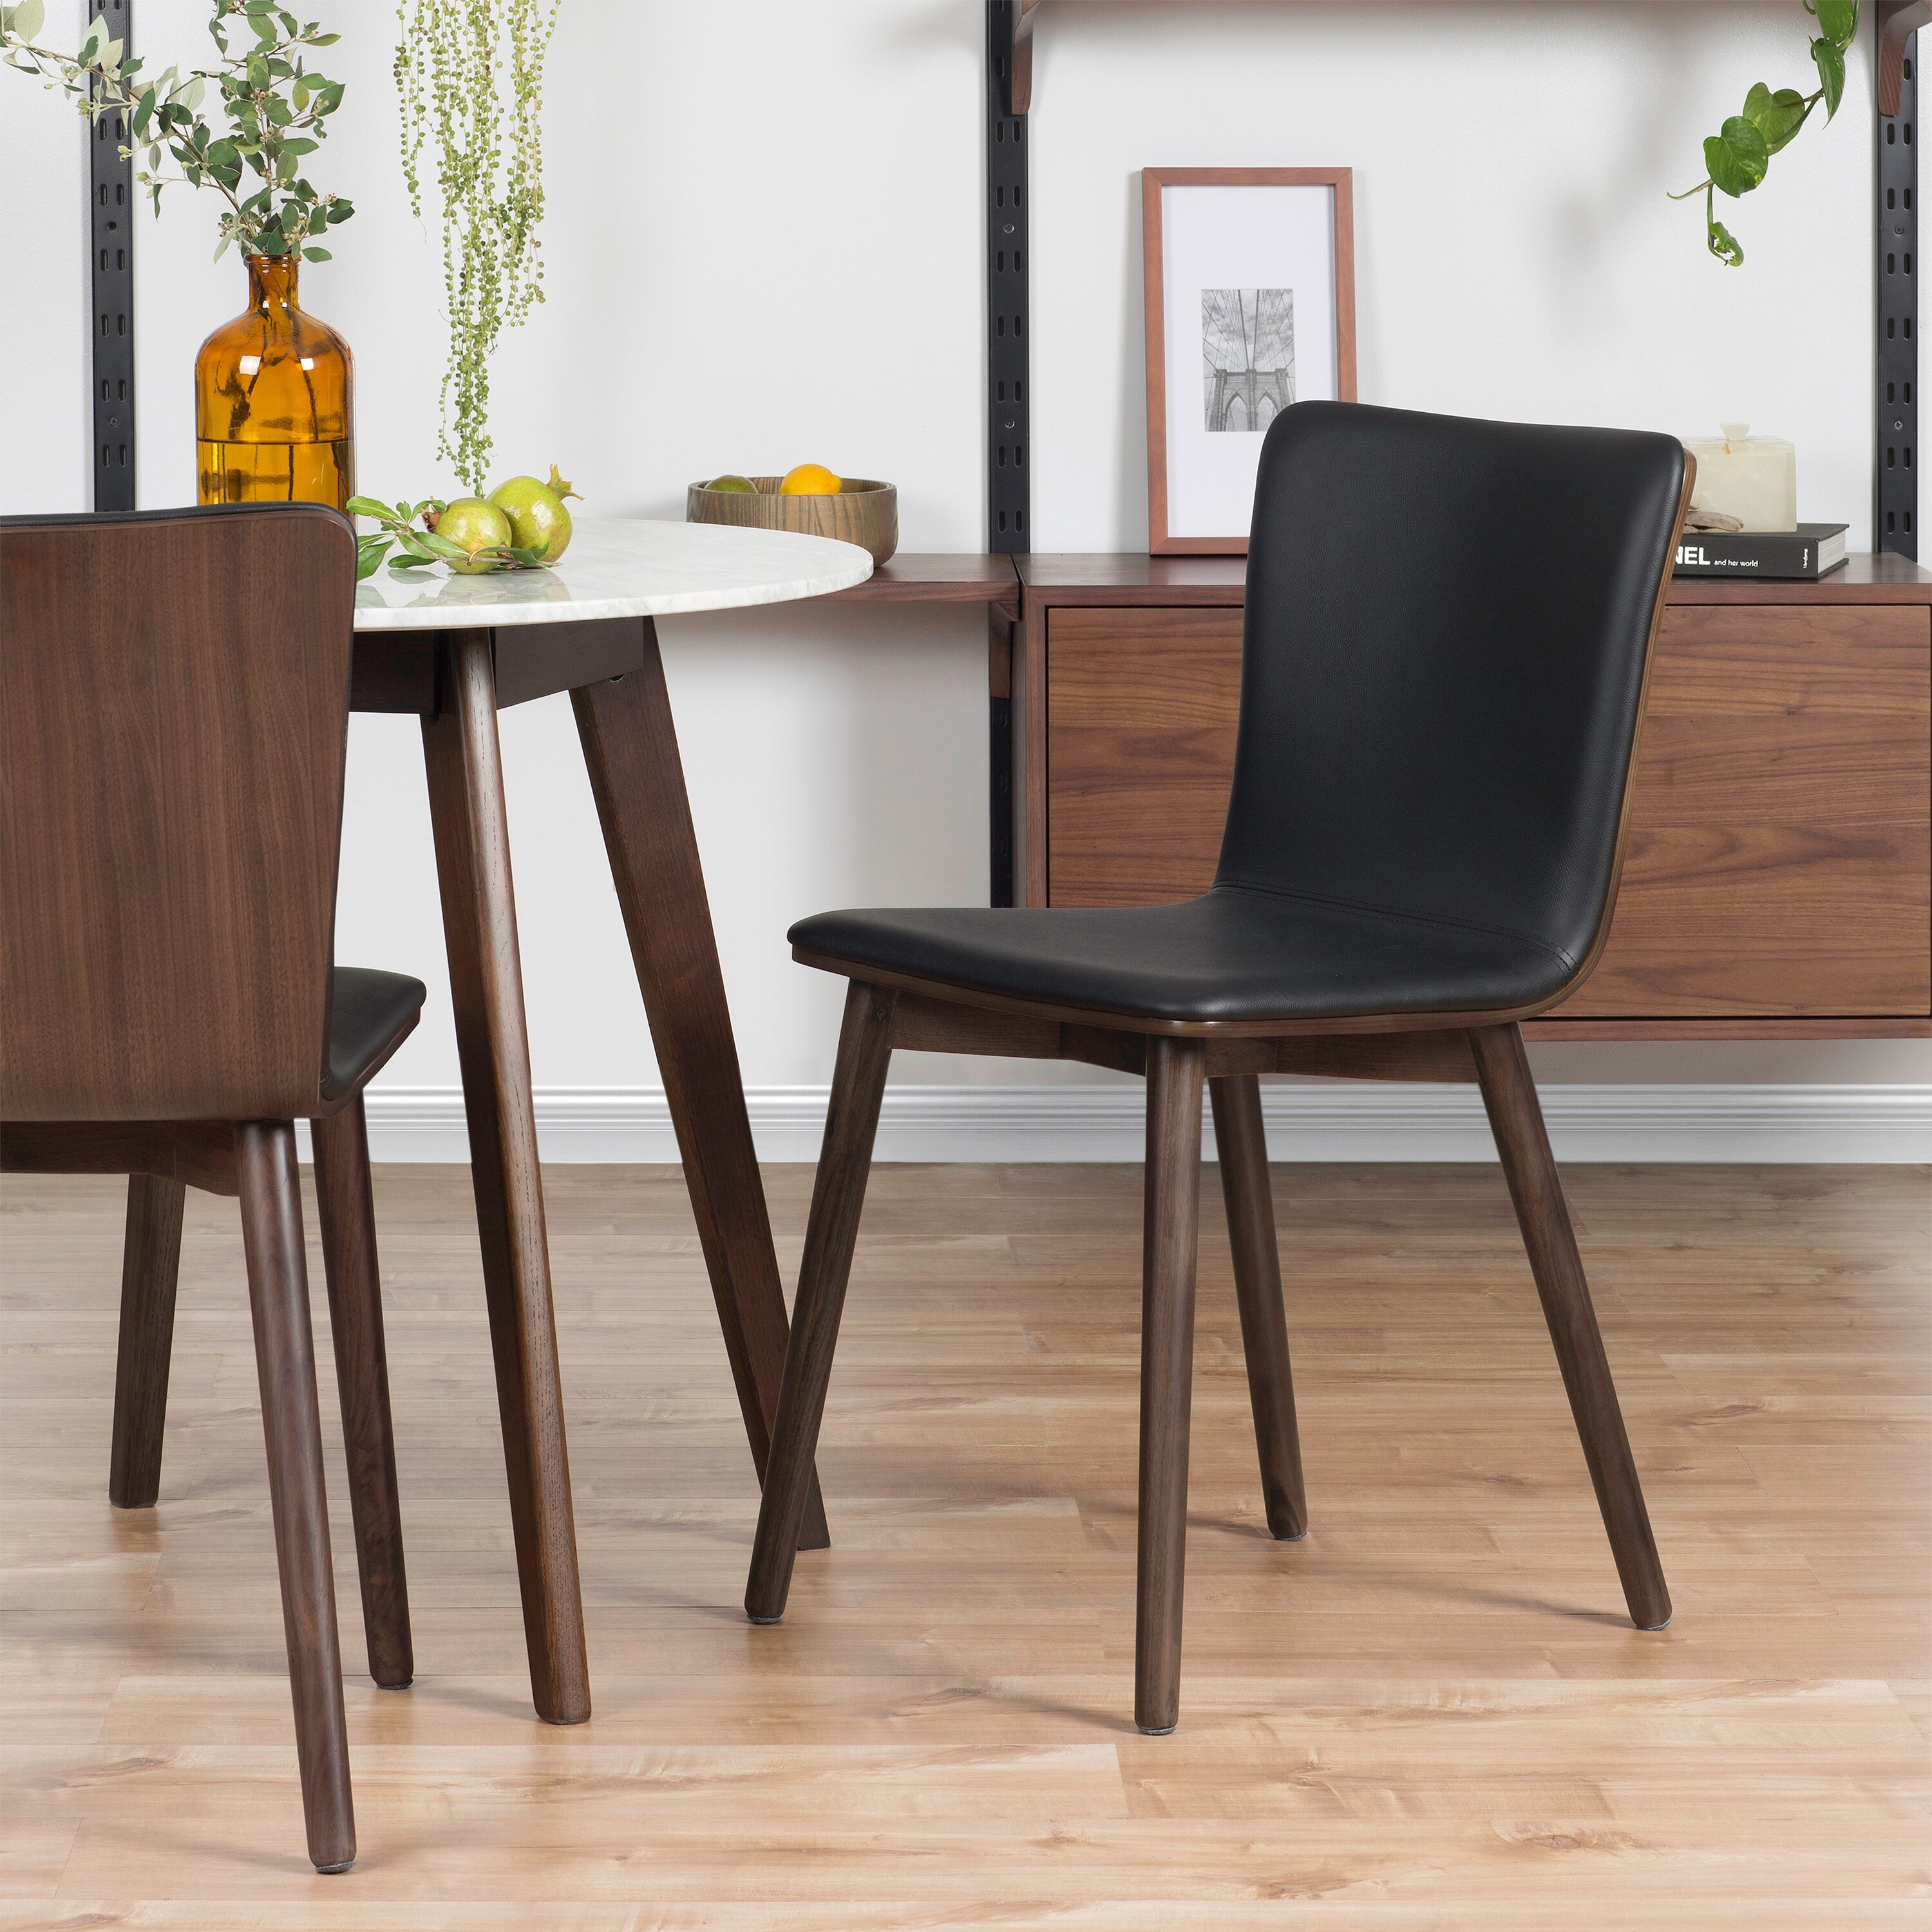 Genuine Leather Modern Contemporary Kitchen Dining Chairs You Ll Love In 2021 Wayfair